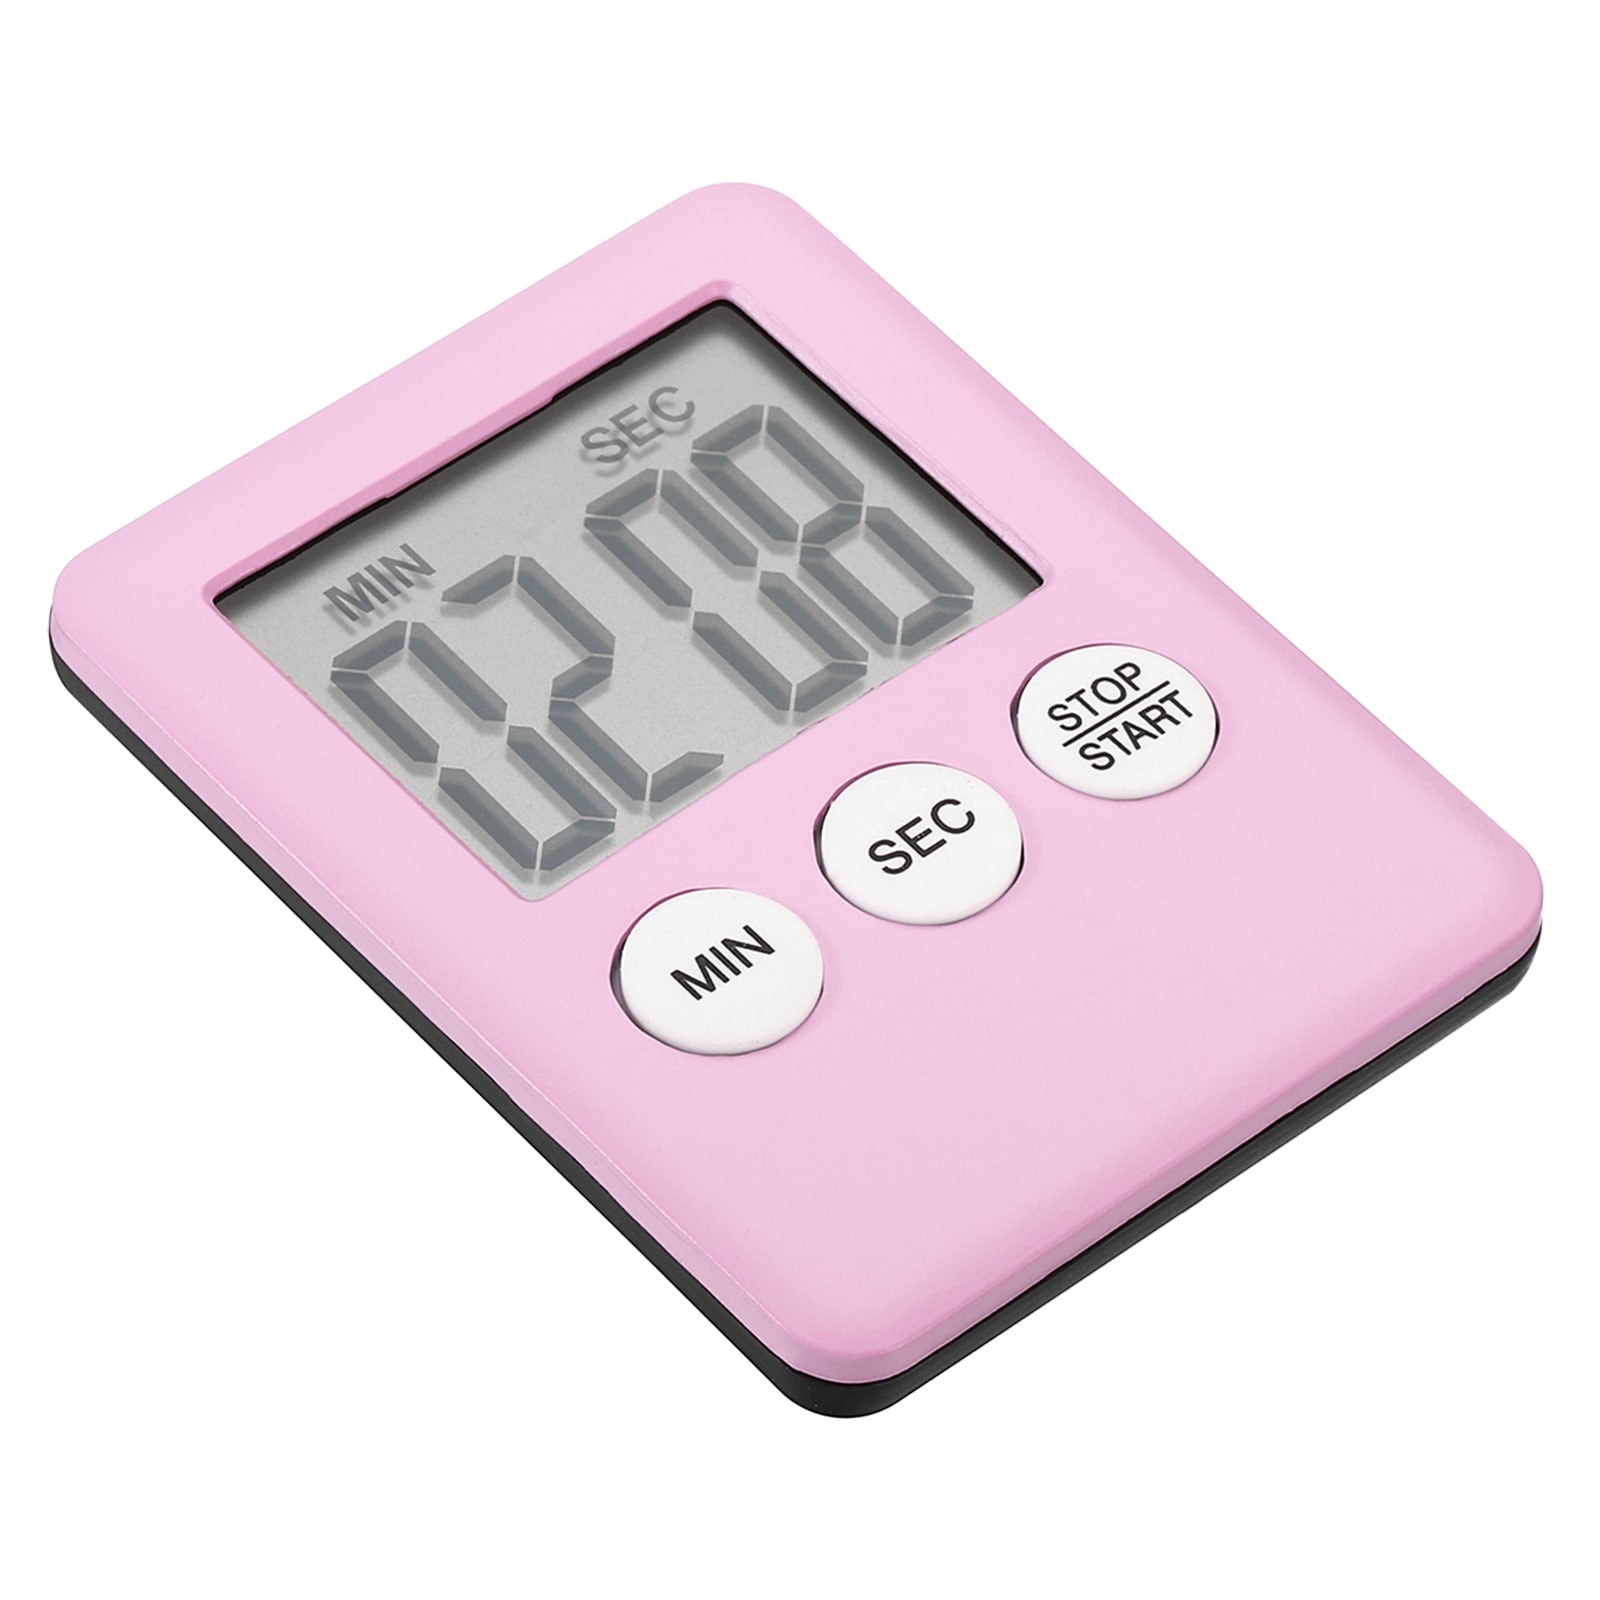 https://ak1.ostkcdn.com/images/products/is/images/direct/9c5ee4619d9fcf0ab4822b4ea9964c36da736b12/Digital-Timer%2C1Pcs-Small-Count-Down-UP-Clock-with-Magnetic%2CKitchen-Timer-Pink.jpg